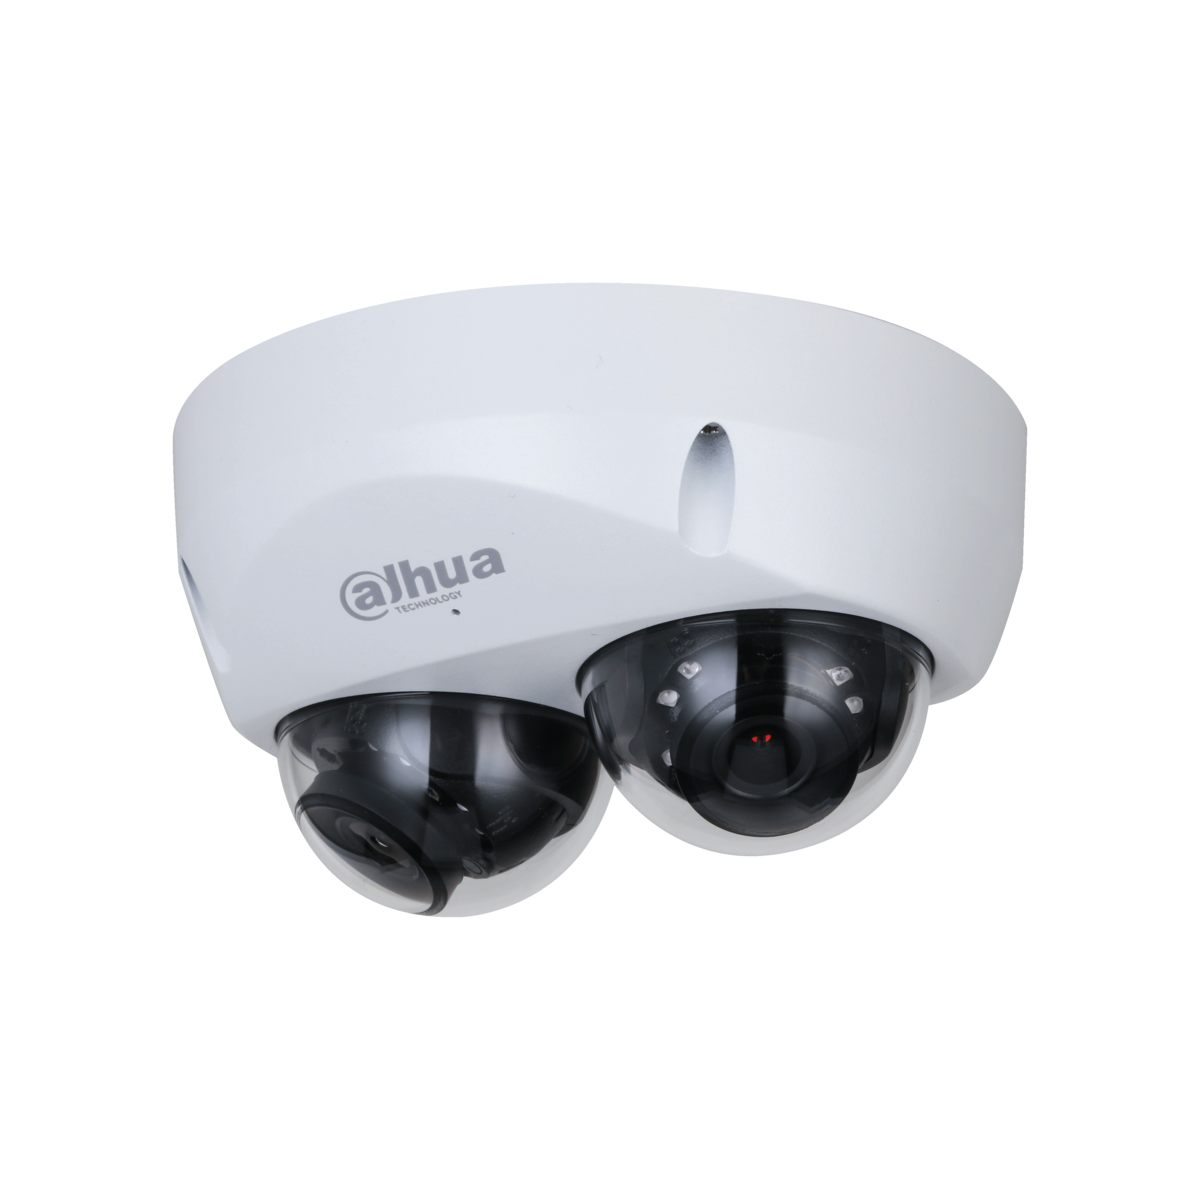 WIZMIND SERIES IP CAMERA WHITE AI PEOPLE COUNT 4MP H.264/5 DUAL LENS 120 WDR METAL 2.8MM FIXED LENS STARLIGHT IR 20M POE IP67 BUILT IN MIC AUDIO IN AUDIO OUT 2 x ALARM IN 2 x ALARM OUT SUPPORT UP TO 256GB SD IK10 12VDC